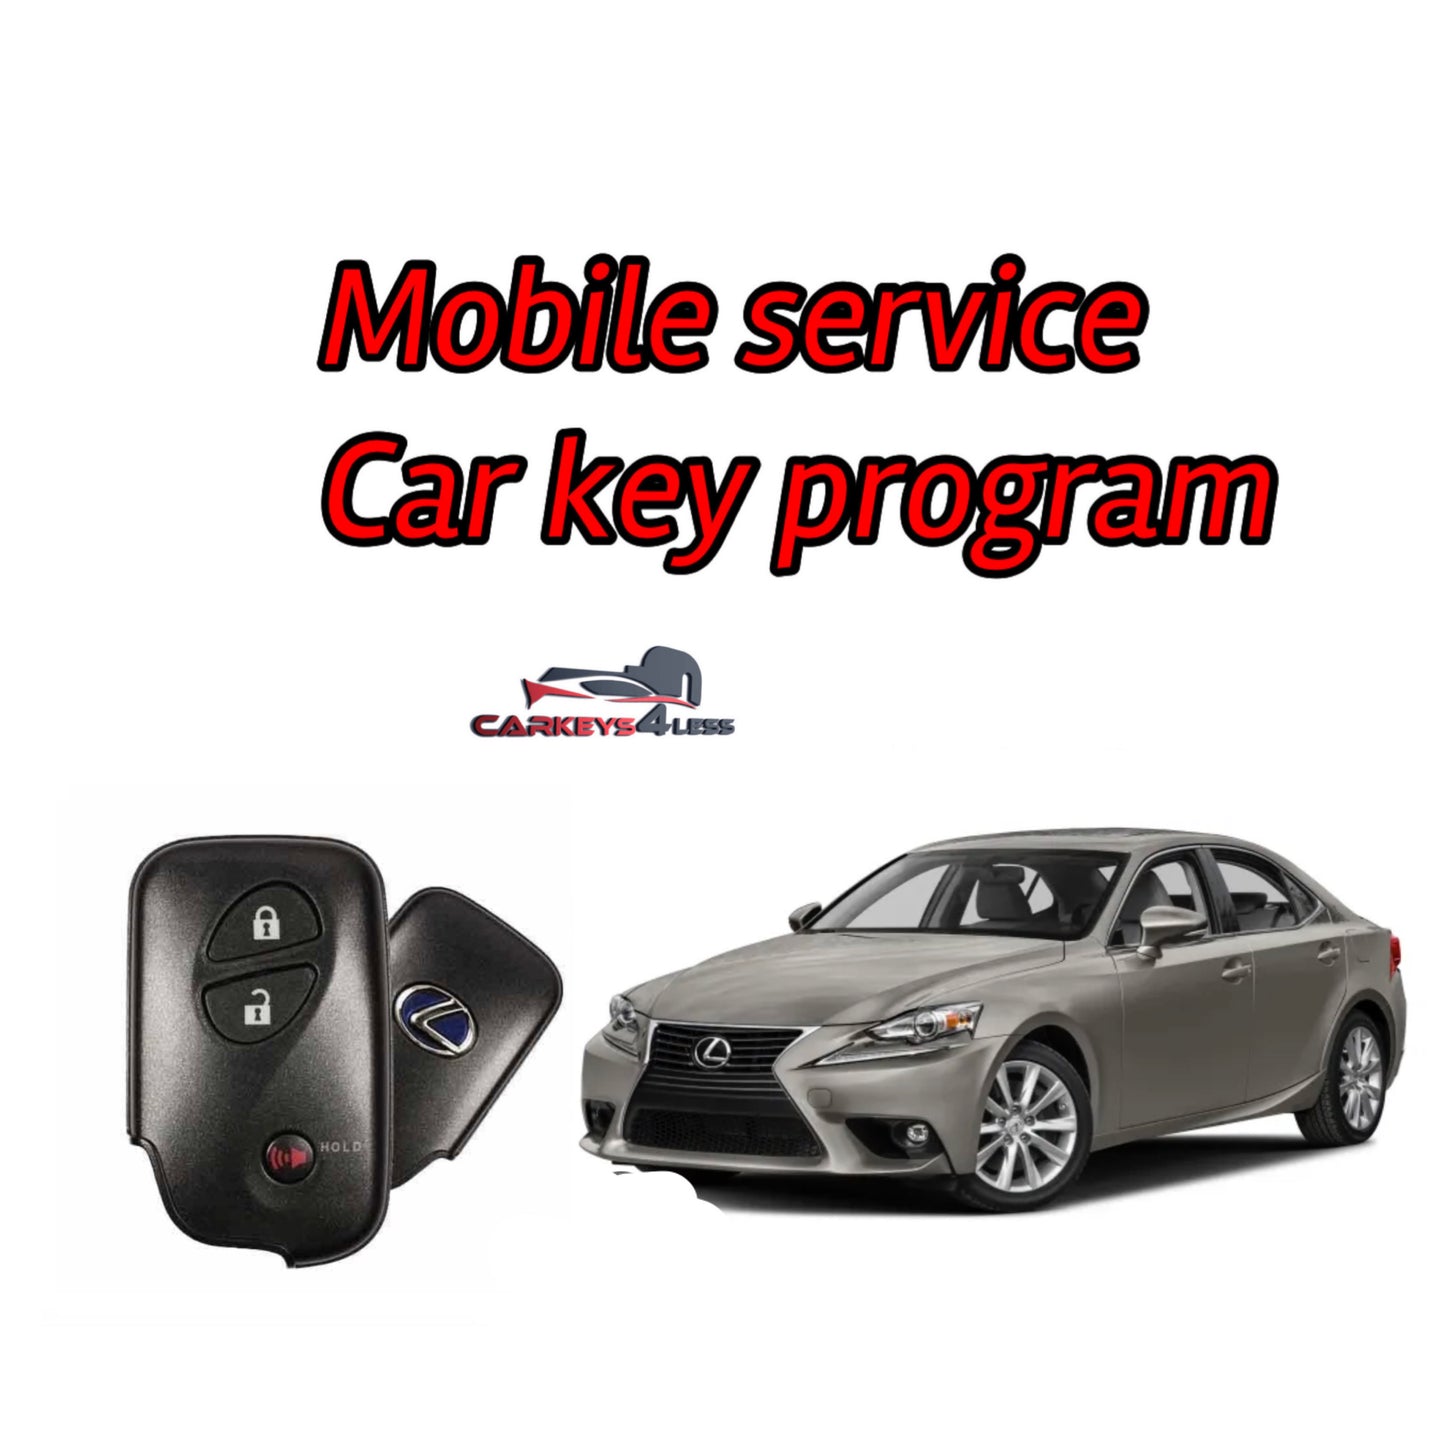 Mobile service for an oem refurbished lexus car key replacement